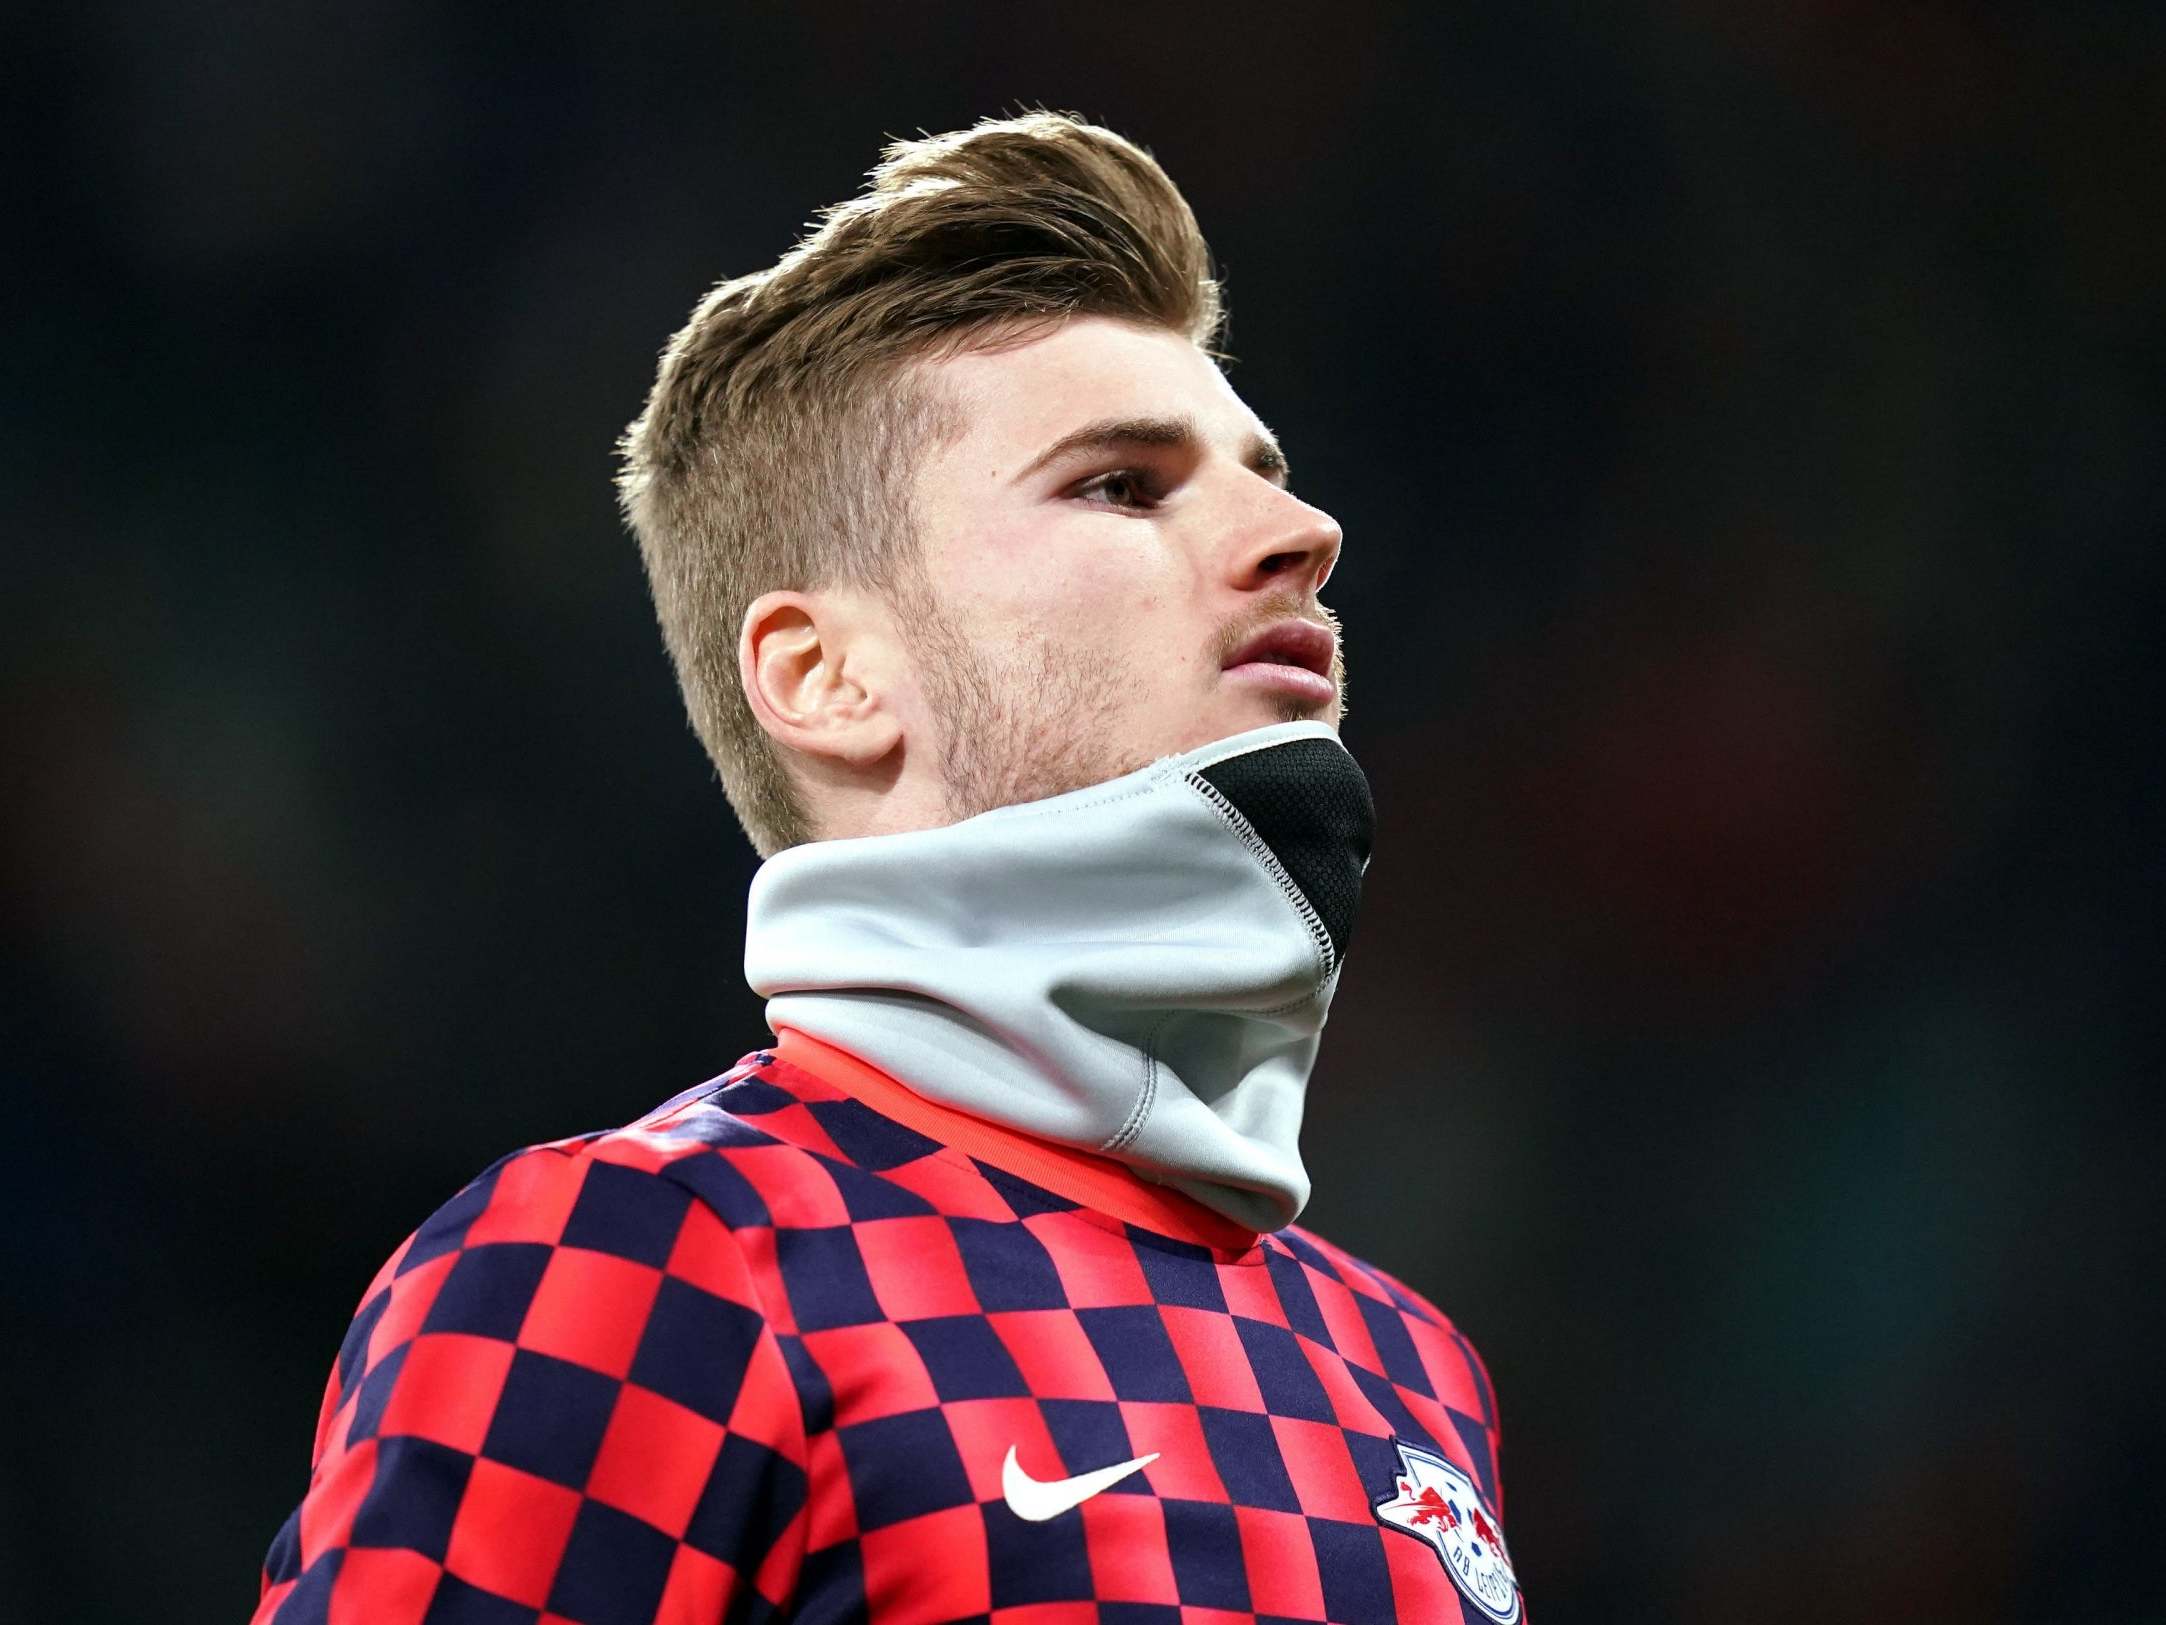 Timo Werner transfer: Chelsea near signing of prolific RB Leipzig striker after Liverpool cool interest